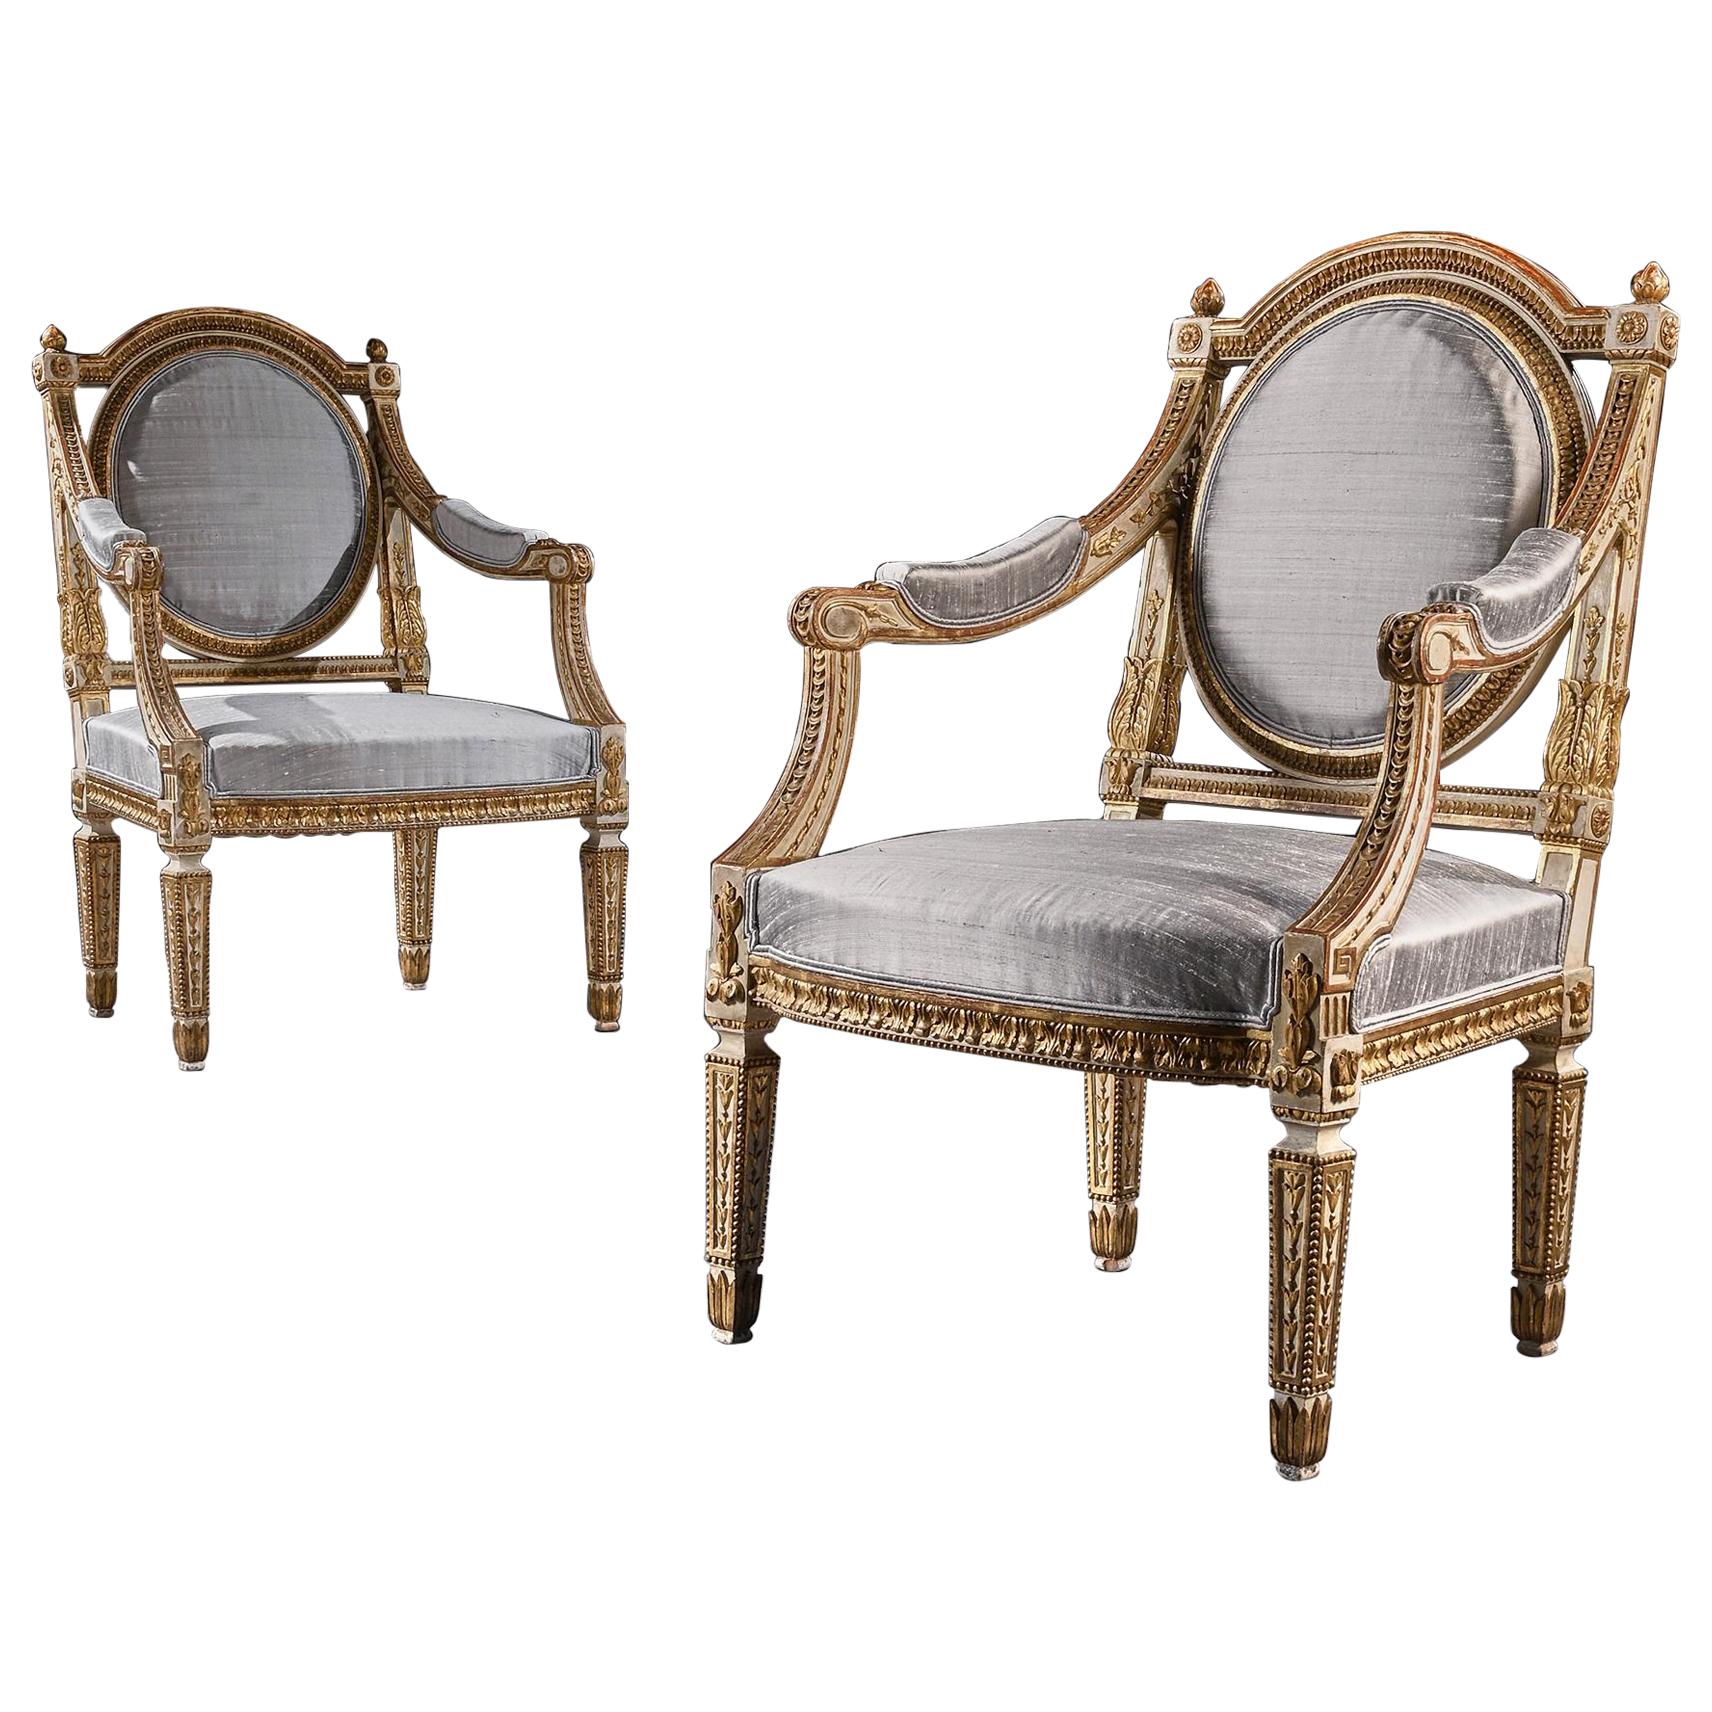 Fine Pair of 19th Century Decorative Italian Painted and Parcel Gilt Armchairs For Sale